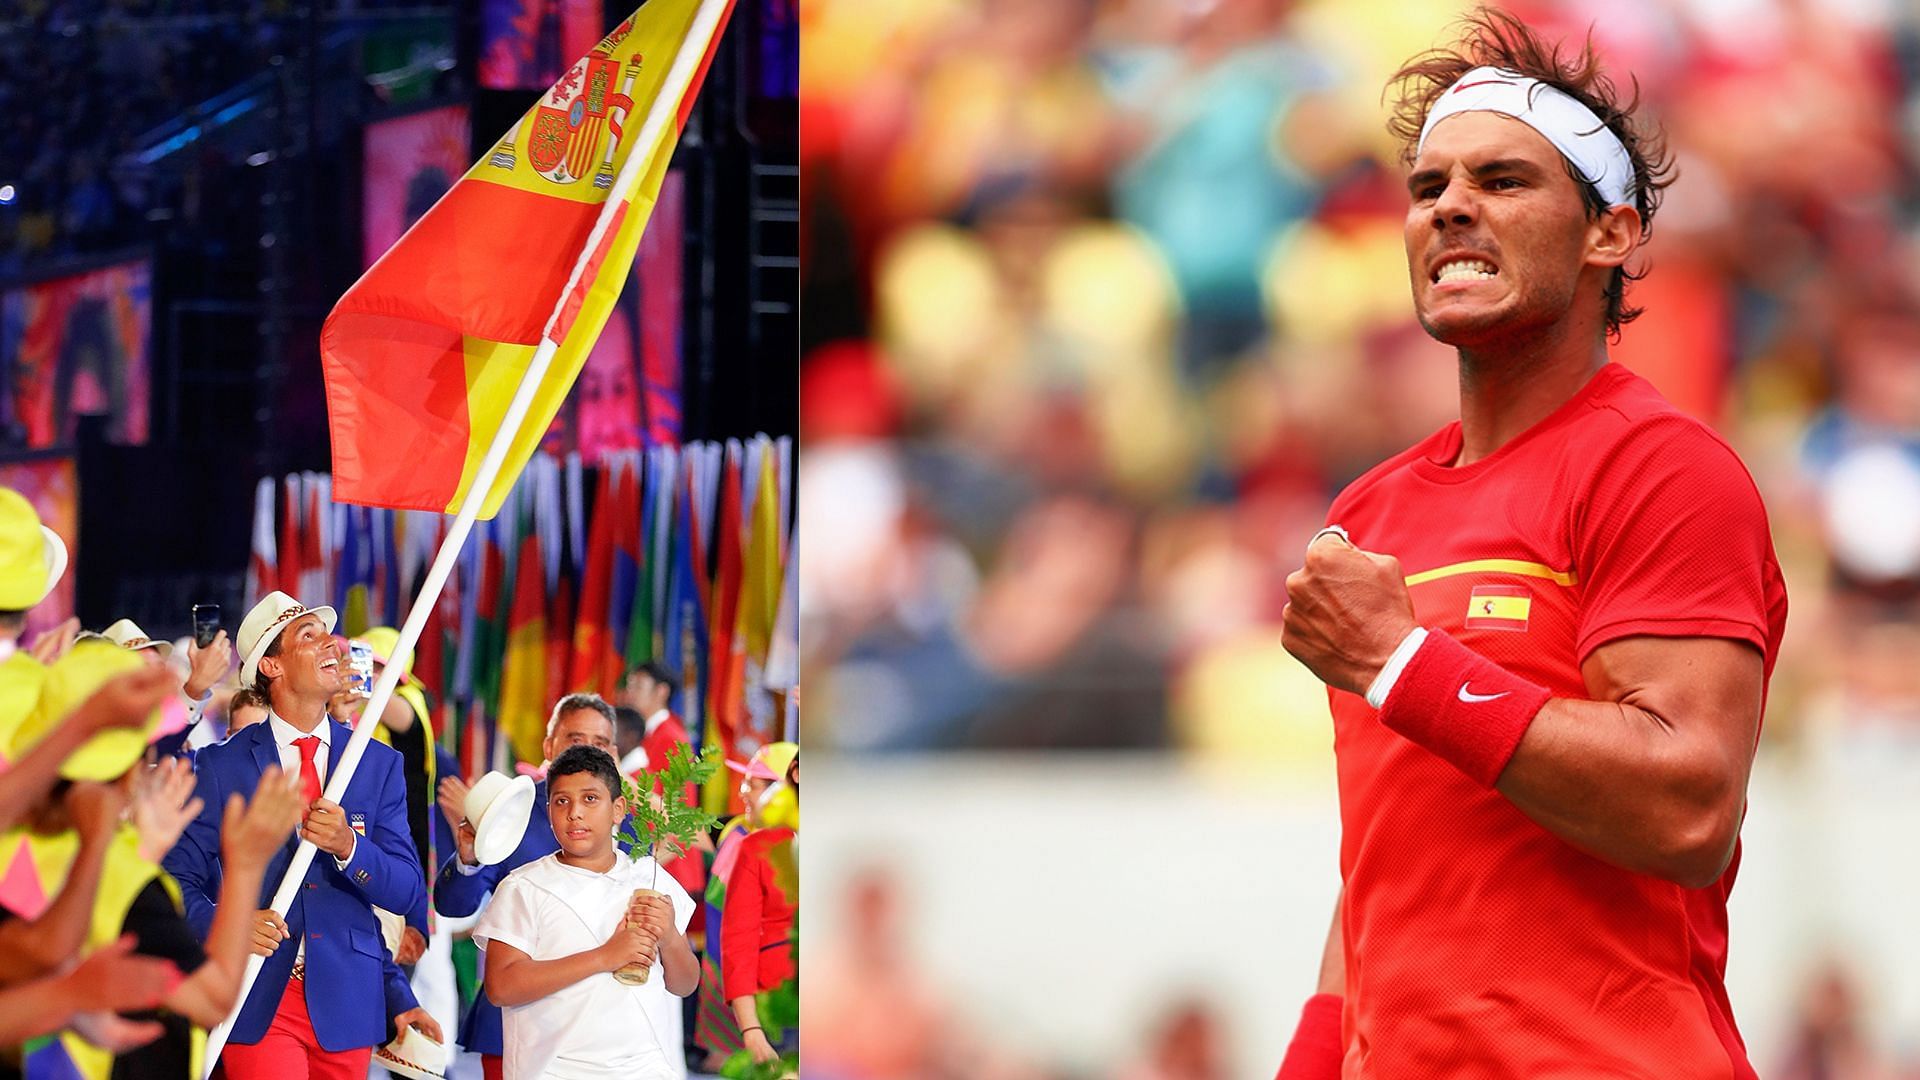 Rafael Nadal is expected to represent Spain at the 2024 Paris Olympics.